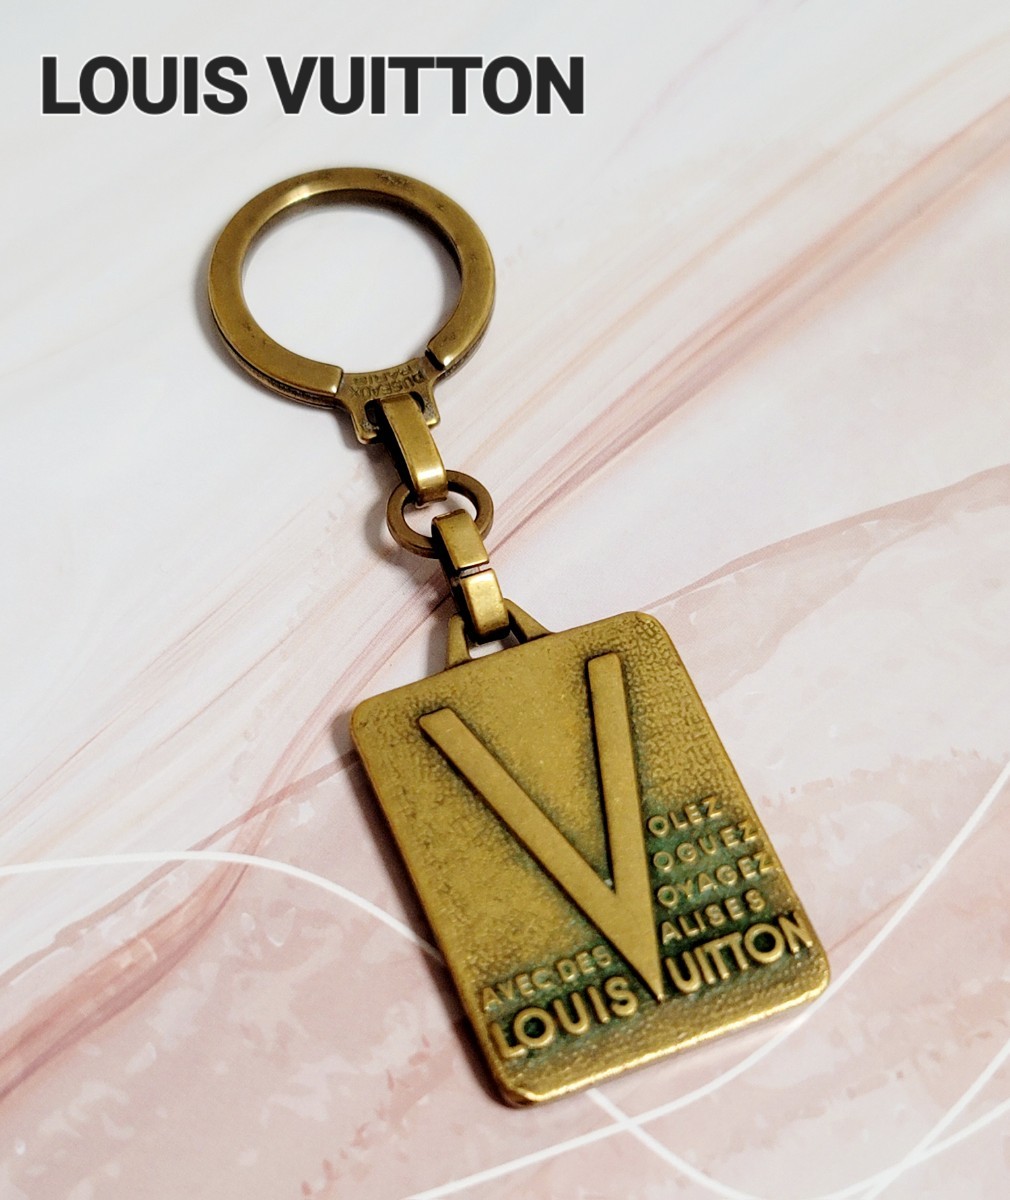 【LOUIS VUITTON】ルイヴィトン キーホルダー キーリング チャーム MALLETIER DEPUIS 1854 ヴィンテージ レア_画像1